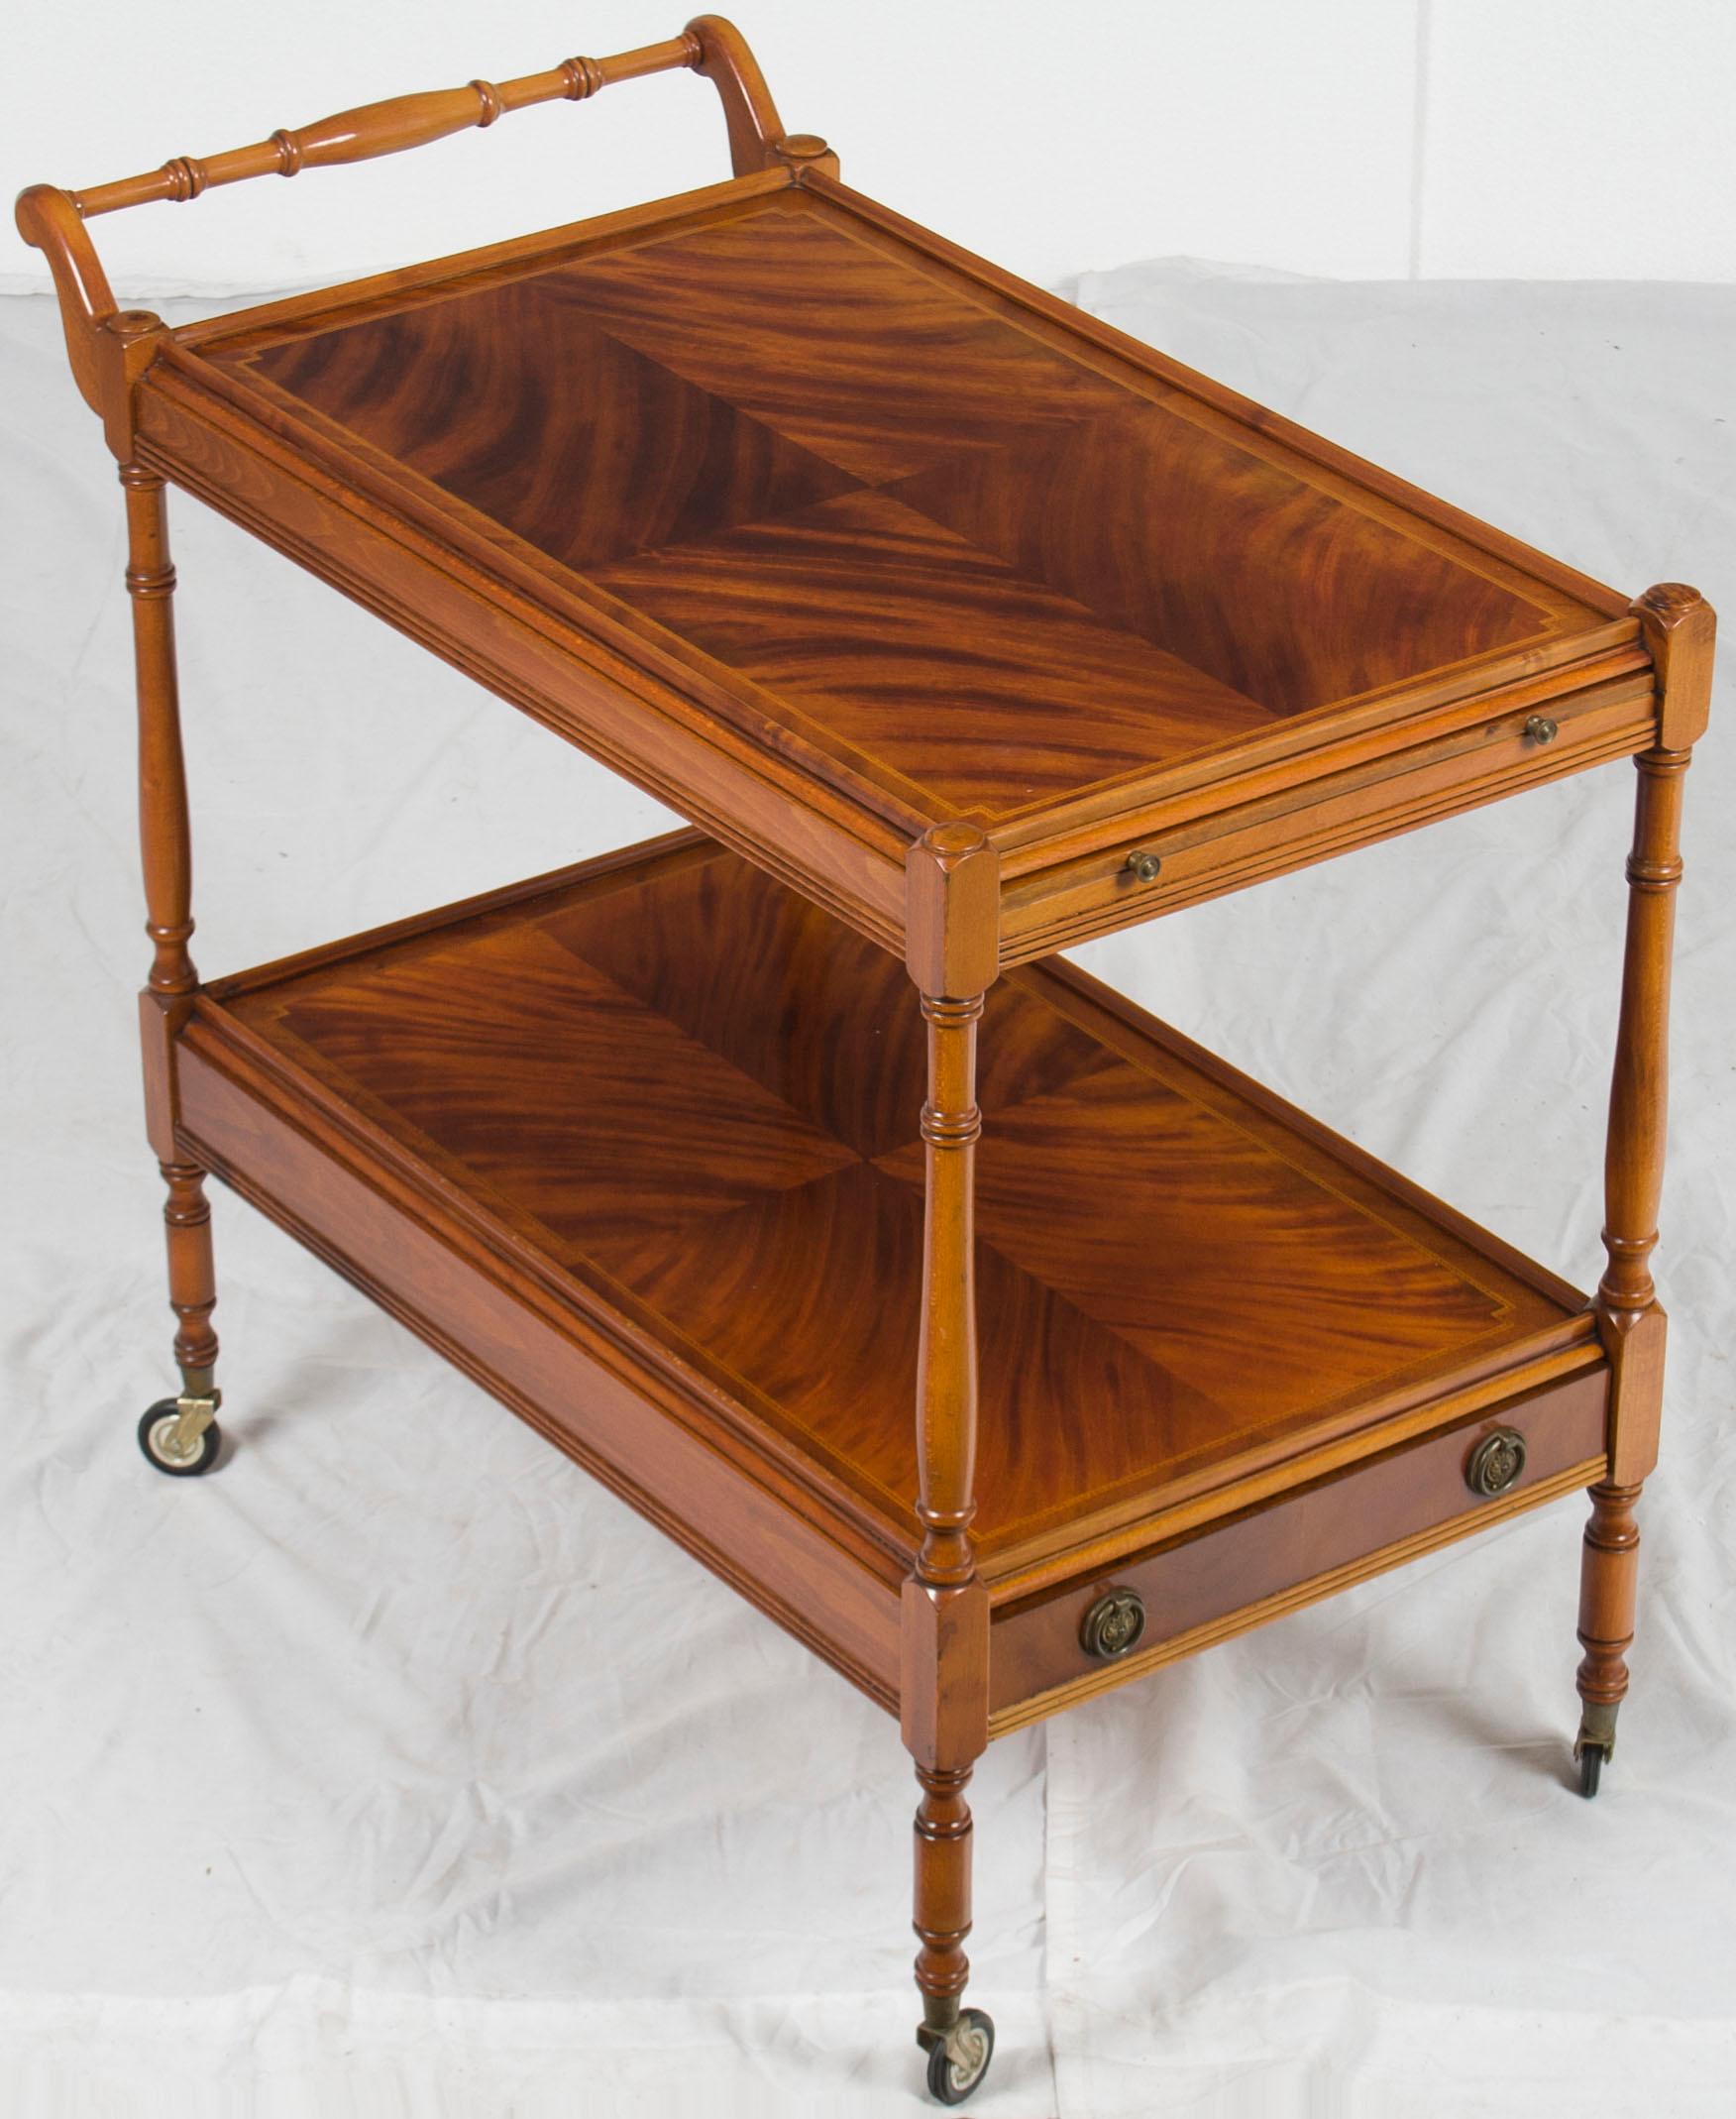 This unique antique tea cart was made in England, circa 1960. It has two-tier for serving or display and is decorated with fluted molding and satinwood inlays. While the original use for a tea cart such as this is quite obvious, today they can be